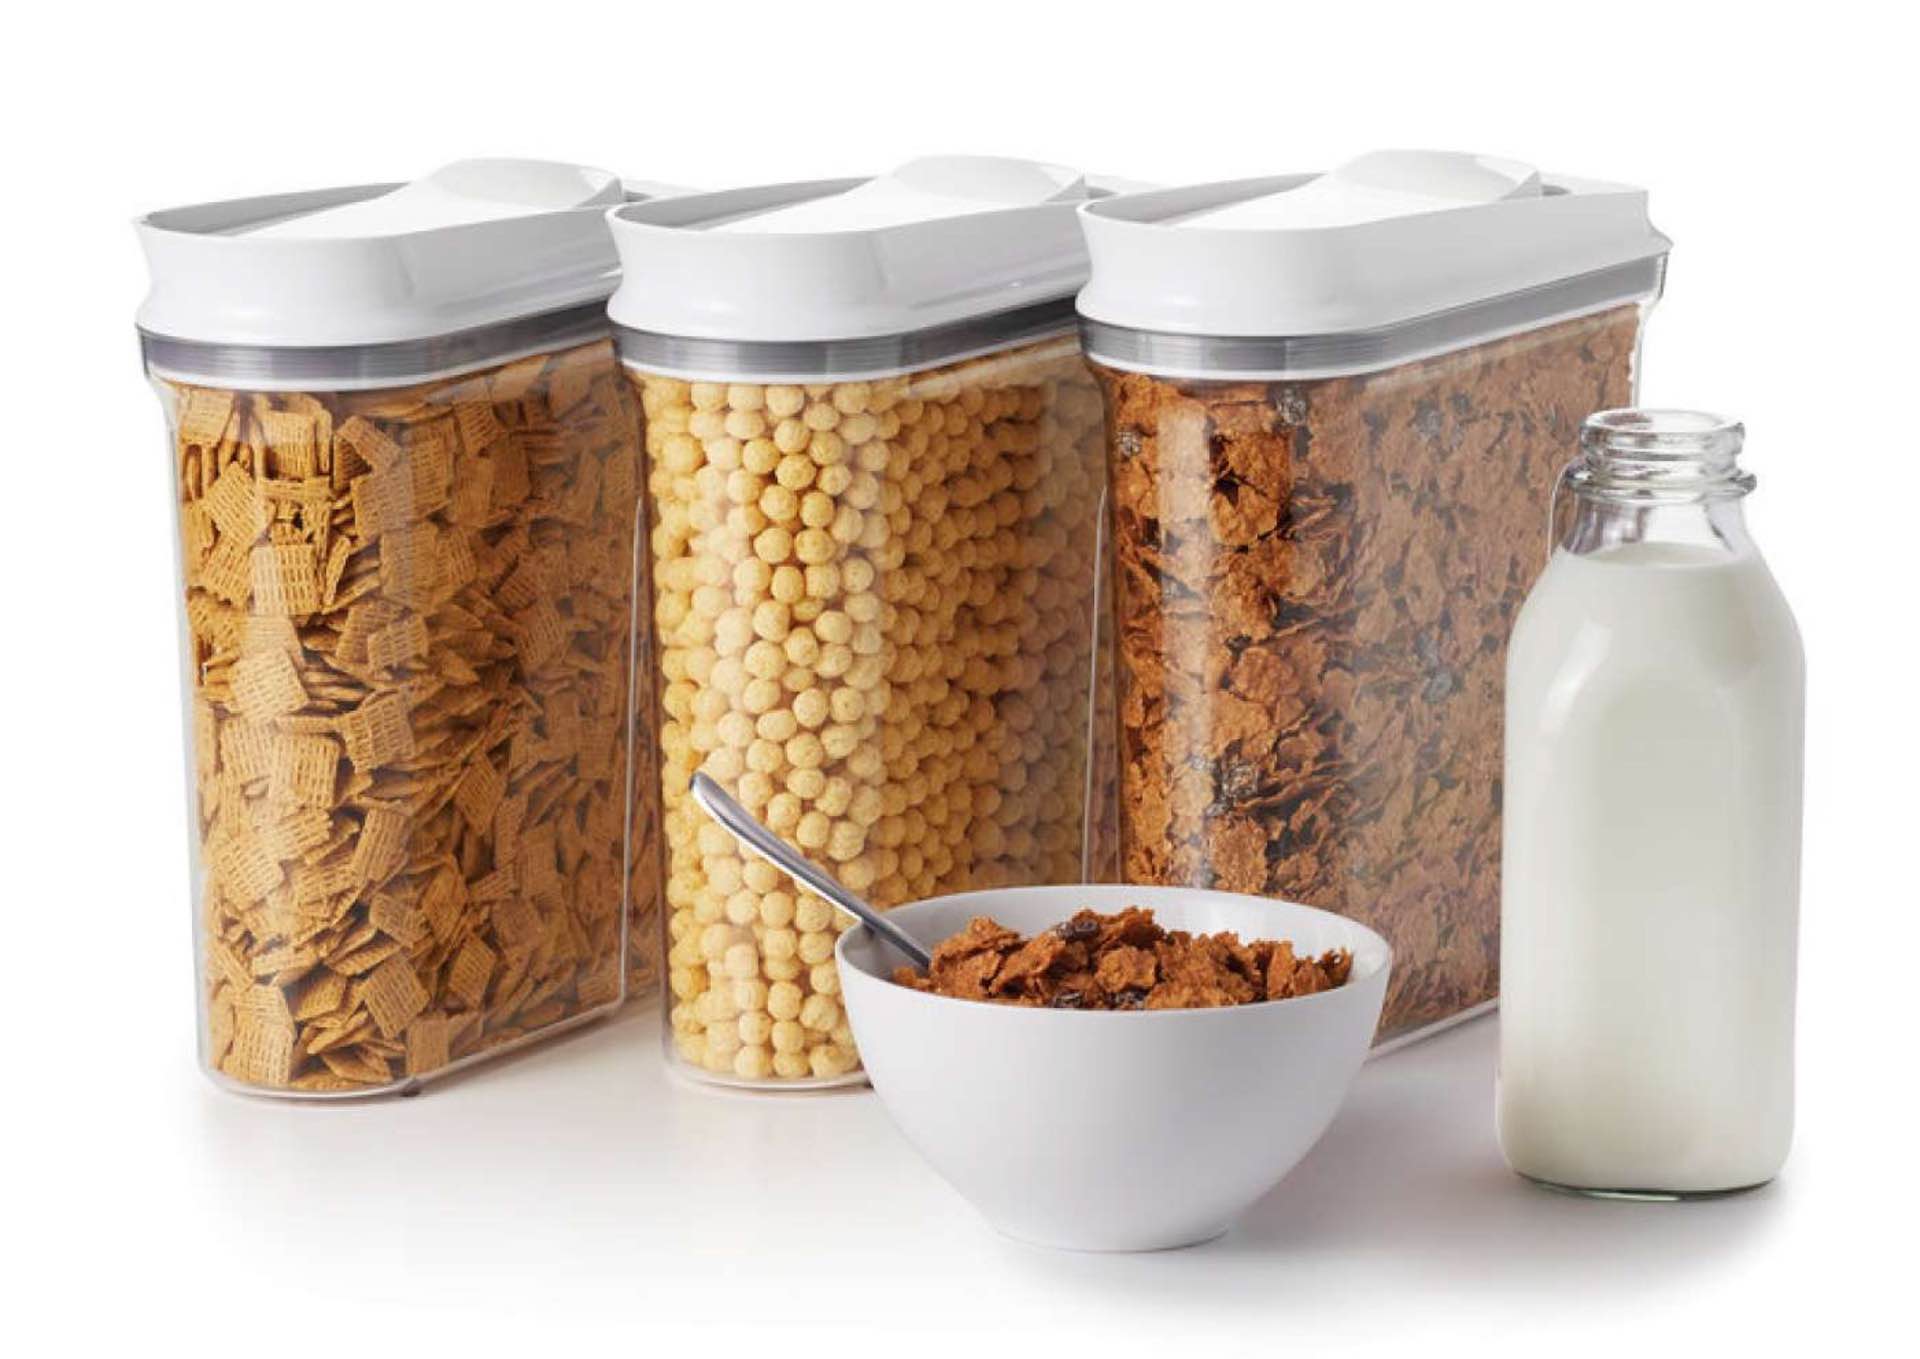 OXO Good Grips POP cereal dispensing containers. ($49 for a set of three, medium-size)